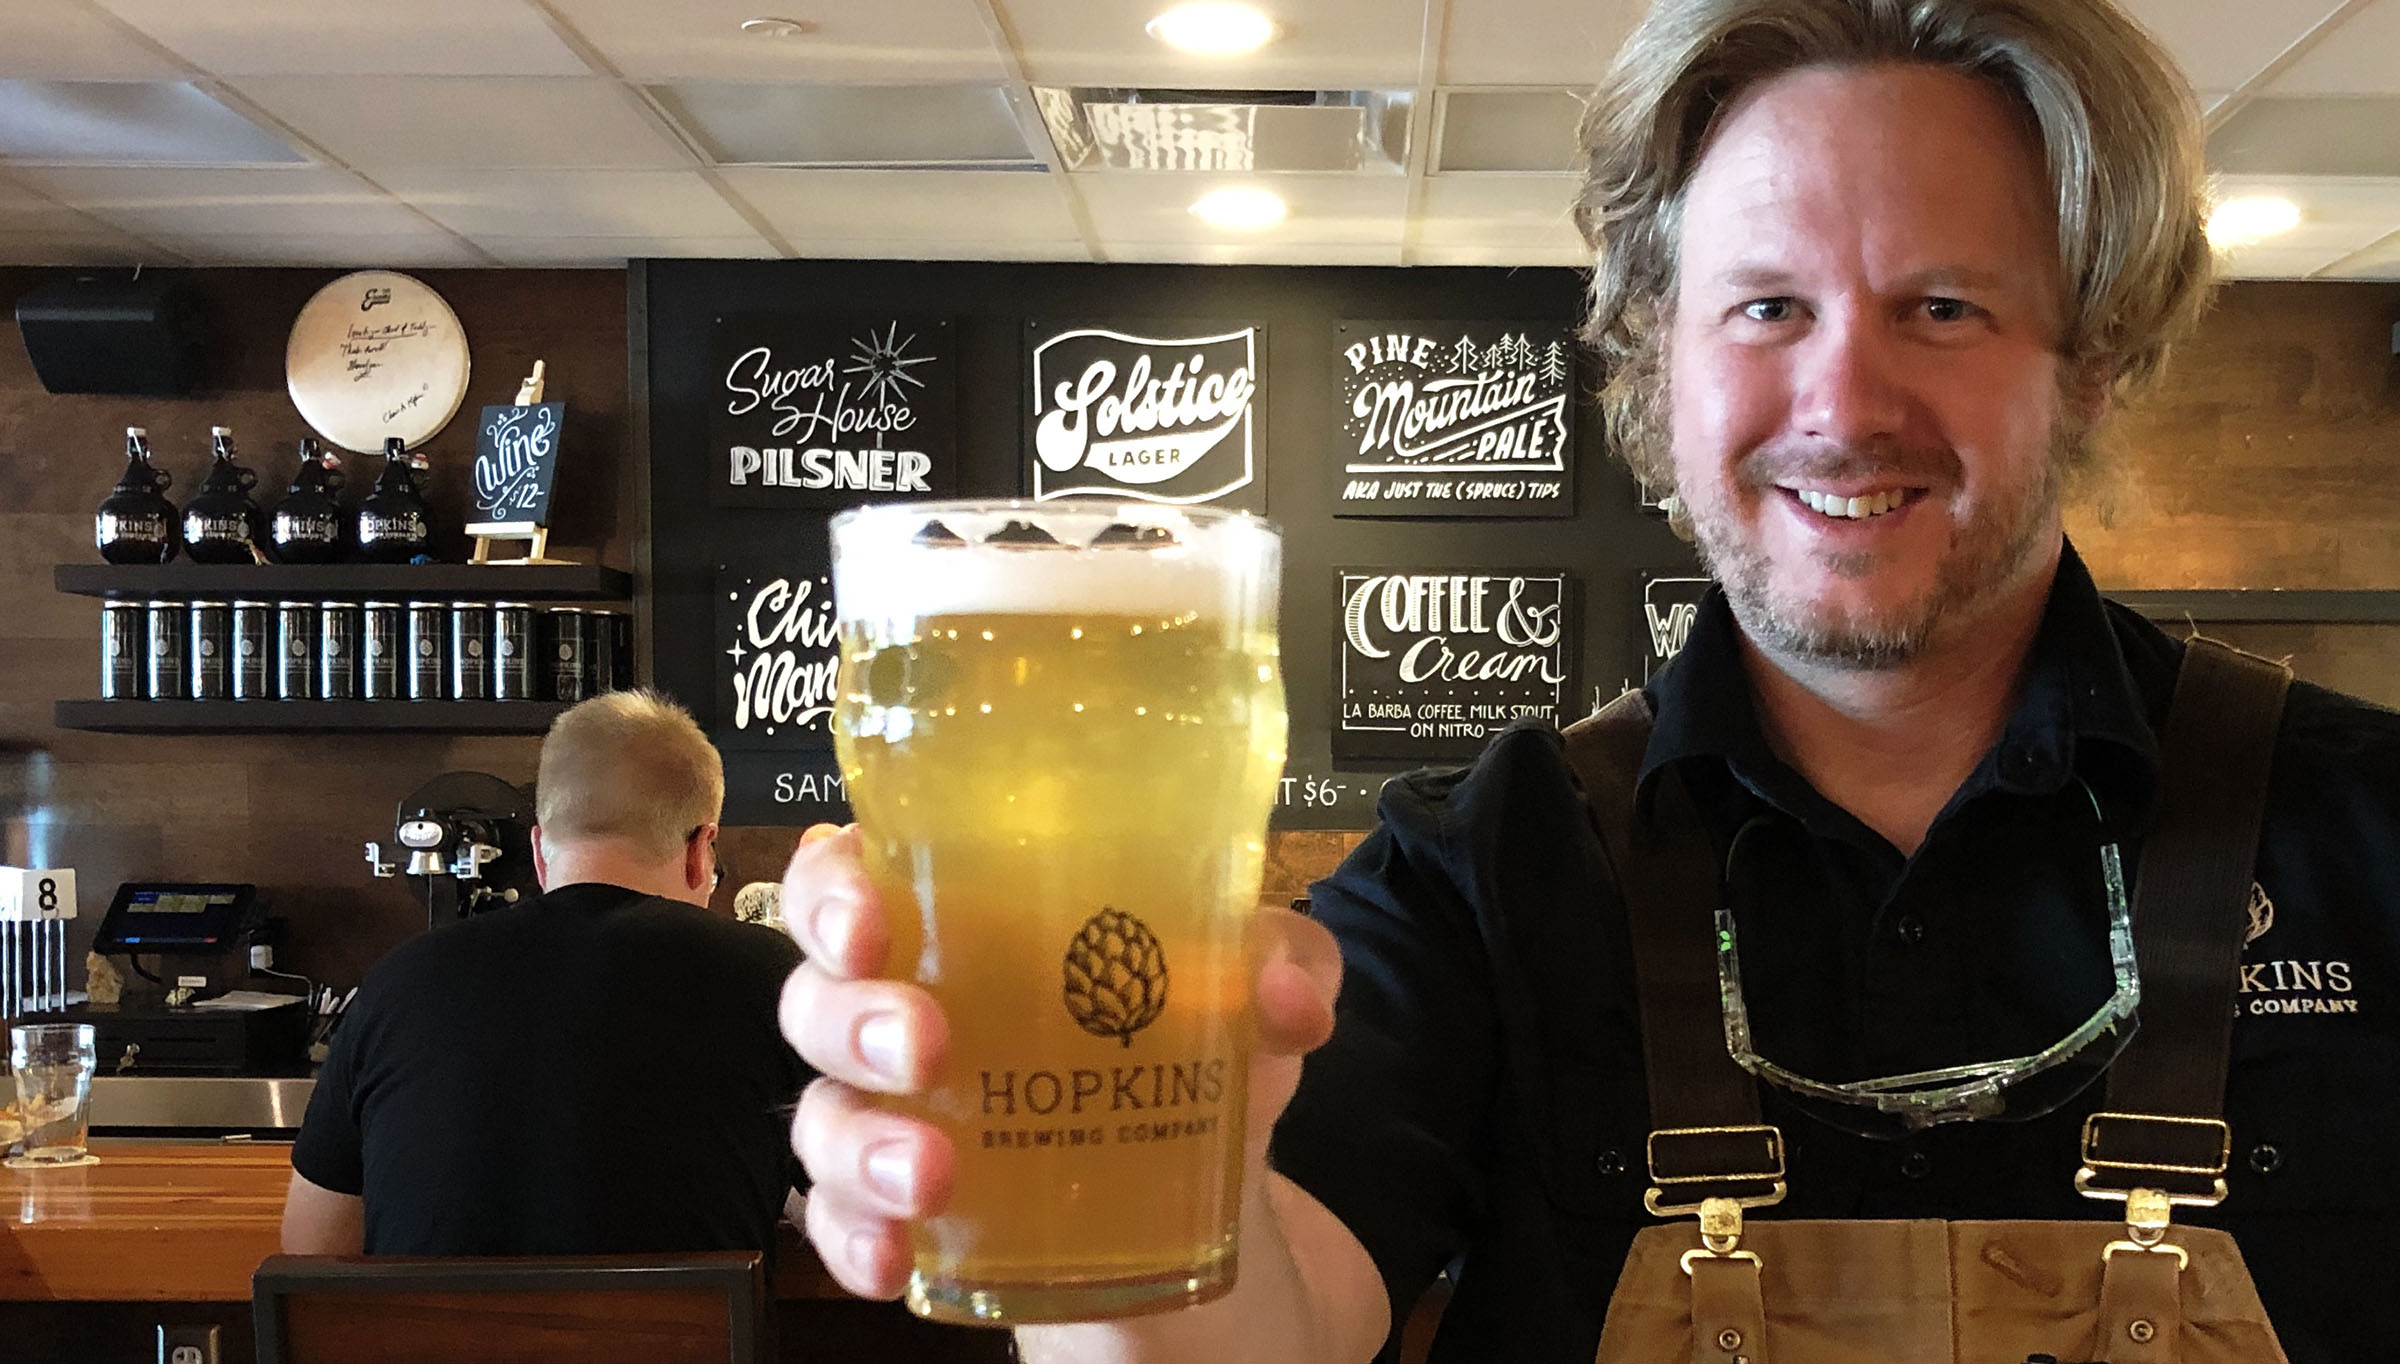 Chad Hopkins, brewer at Hopkins Brewing Co. in Salt Lake City, and a pint of his Sugar House Pilsner. He grew up a mile from where his brewpub now stands.